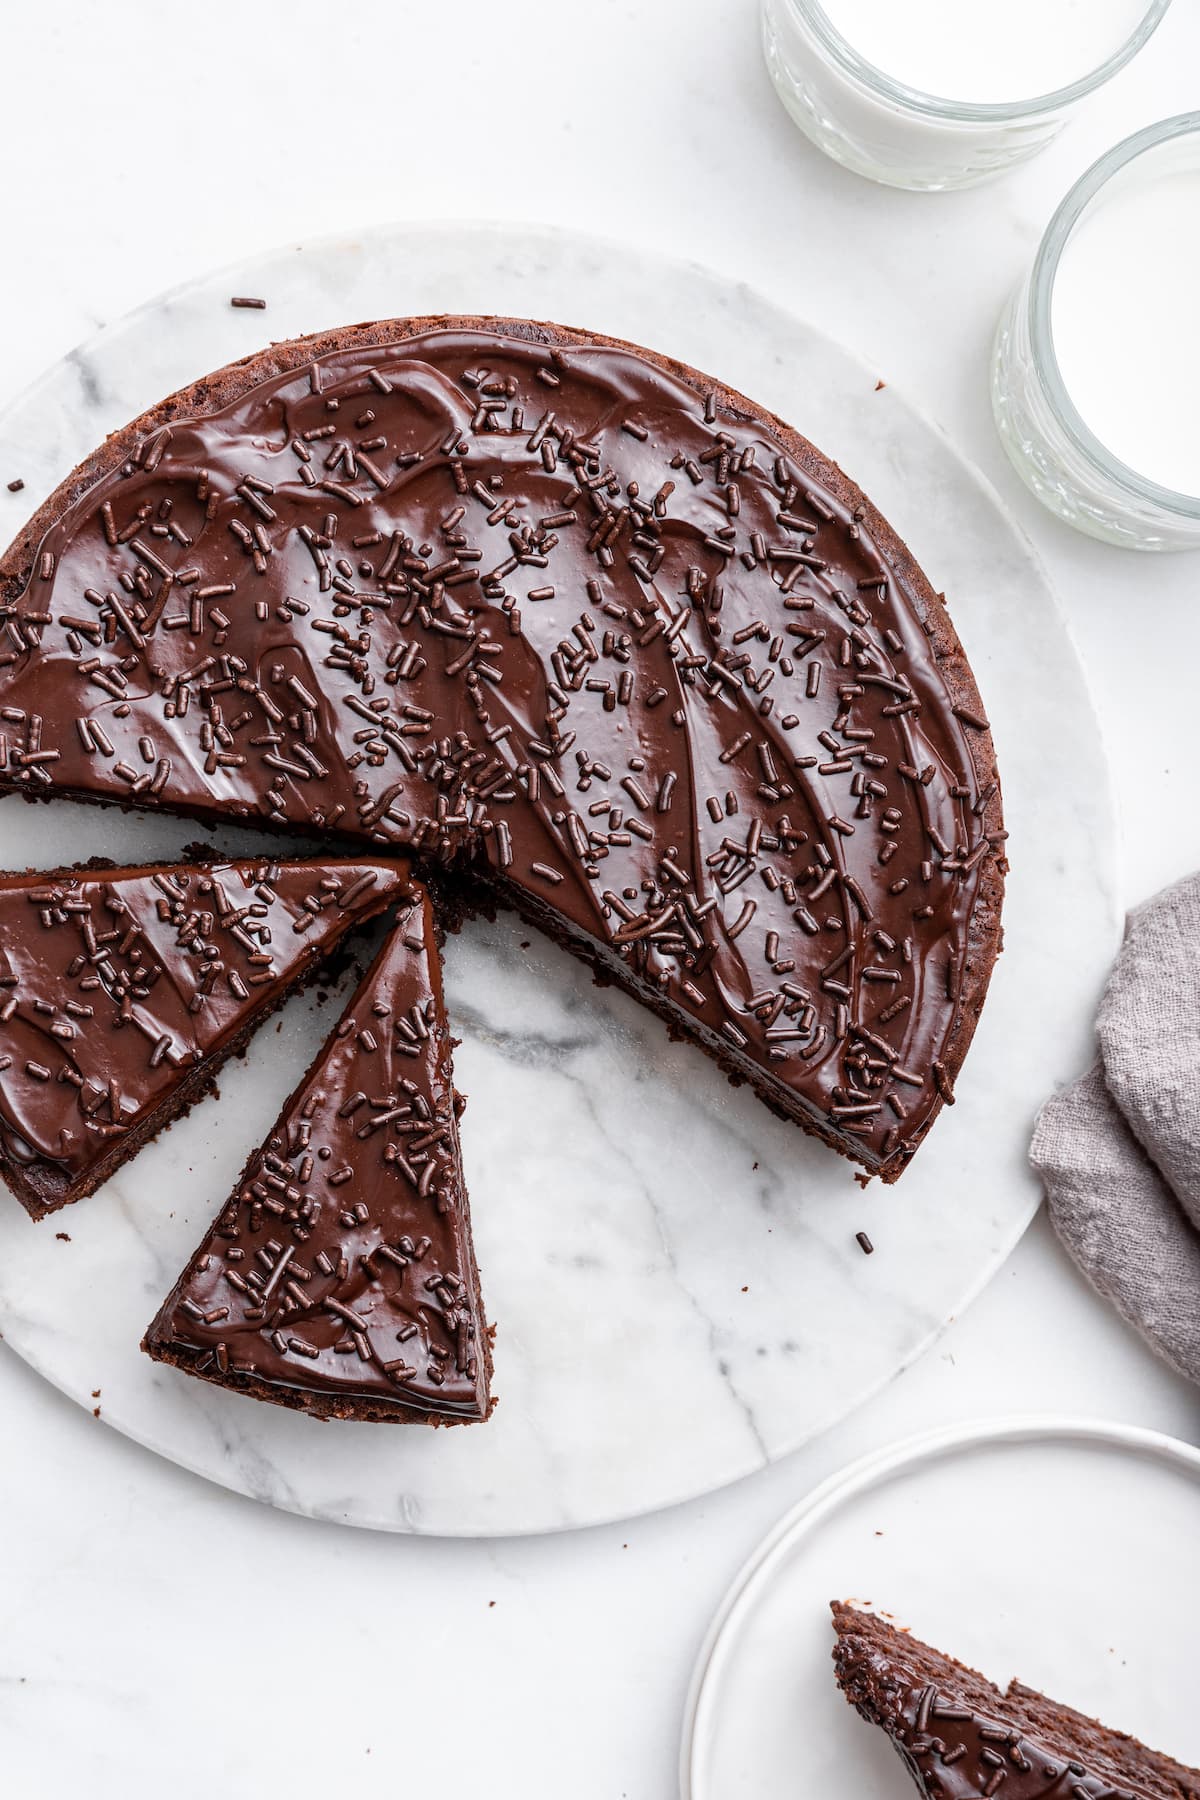 Chocolate protein cake cut into slices on a table.